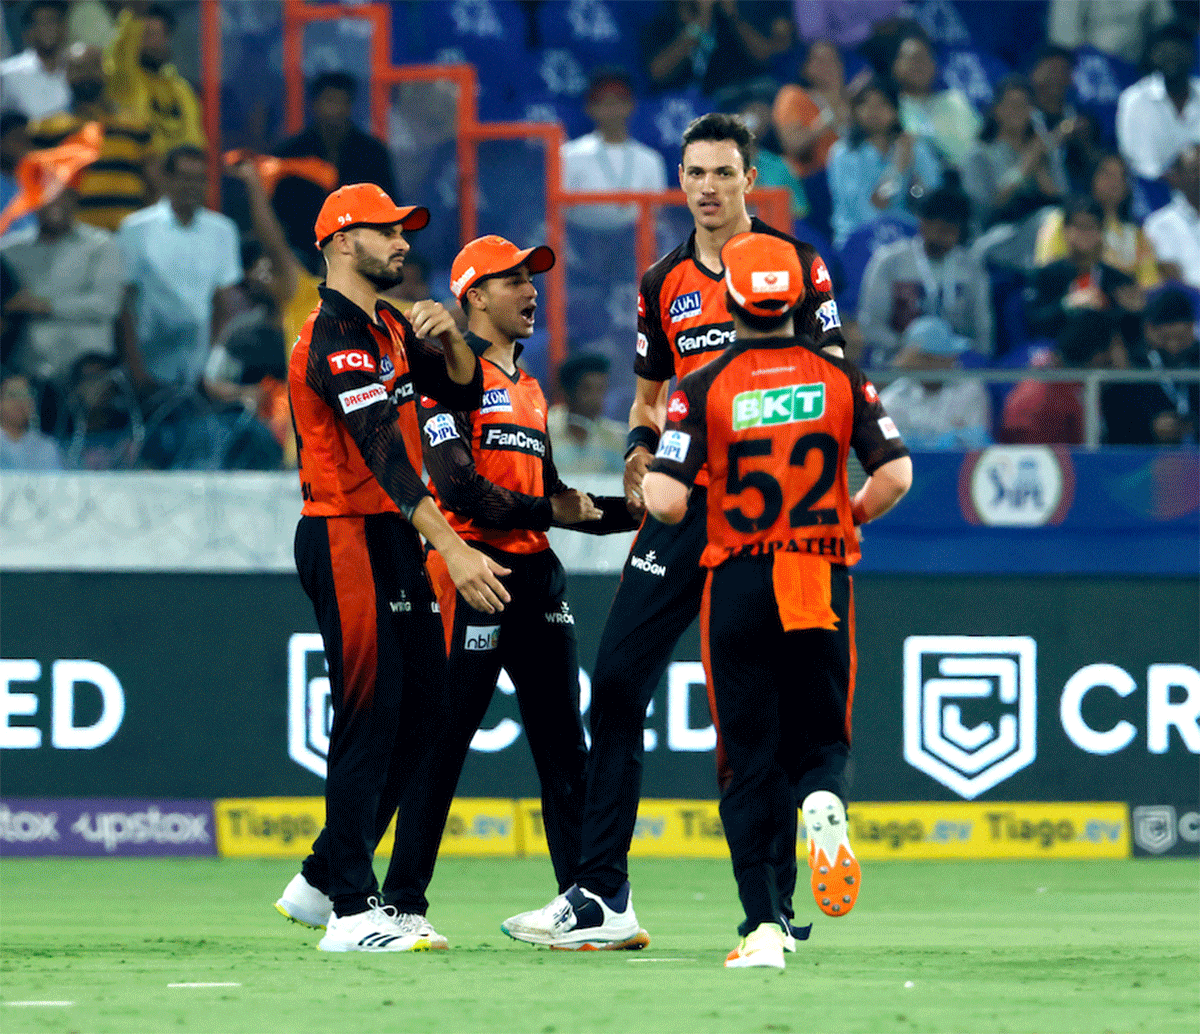 Marco Jansen struck twice in an over with the wickets of Ishan Kishan and Suryakumar Yadav